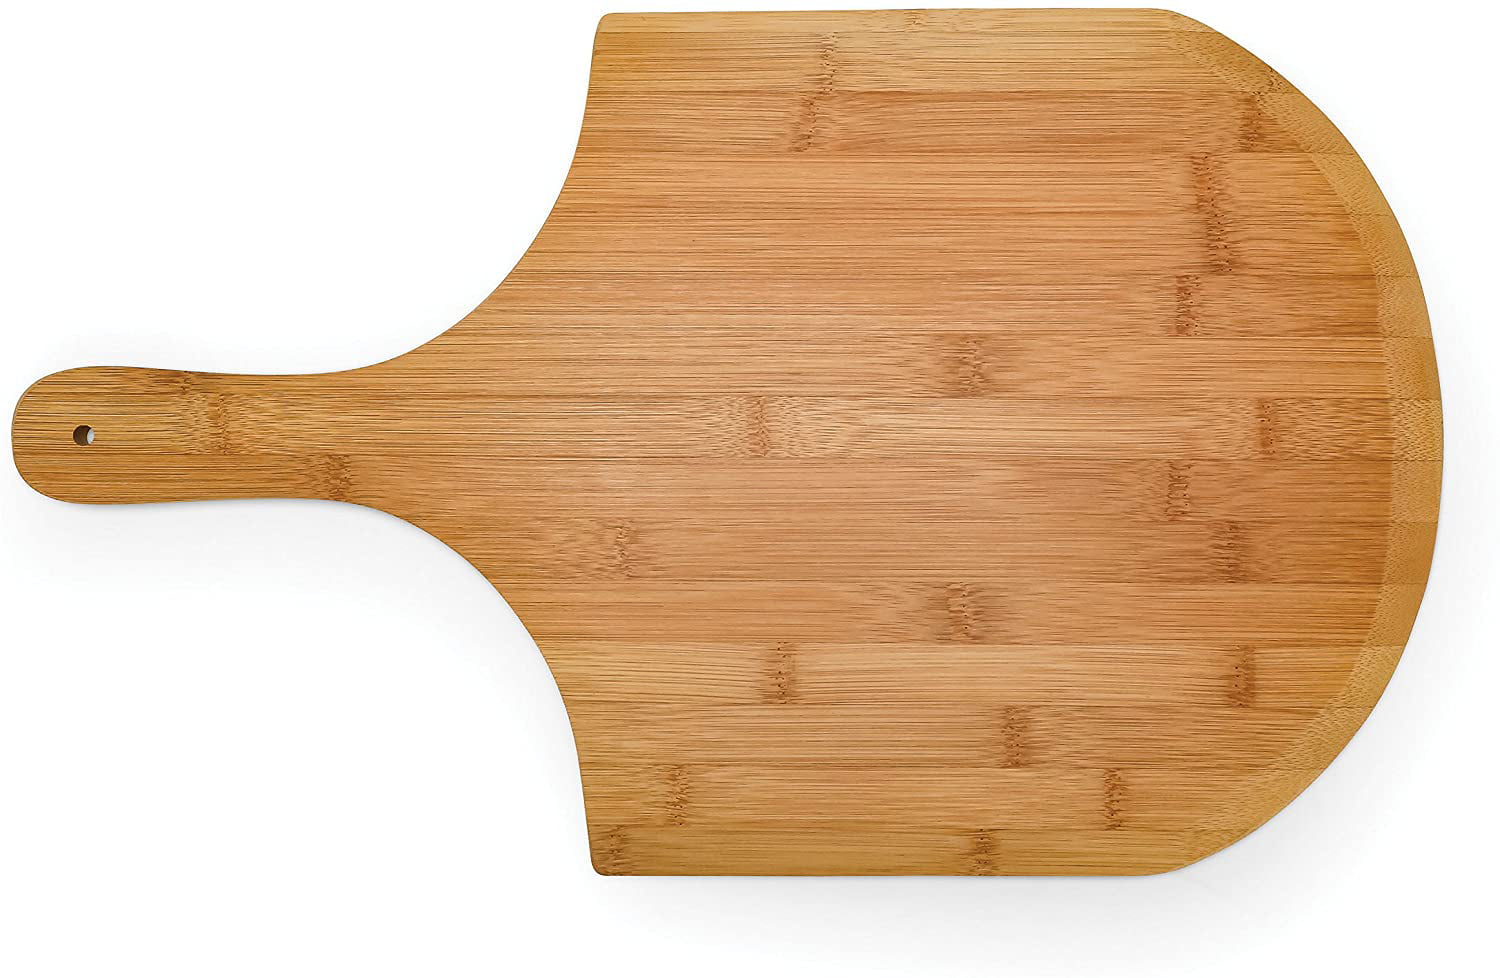 Ceramic Pizza Peel Wooden Cutting Serving Board Bamboo Cheese Paddle Board Spatula Bread & Crackers Platter Charcuterie Boards with Ceramic Board Kitchen Tool 14’’x7’’